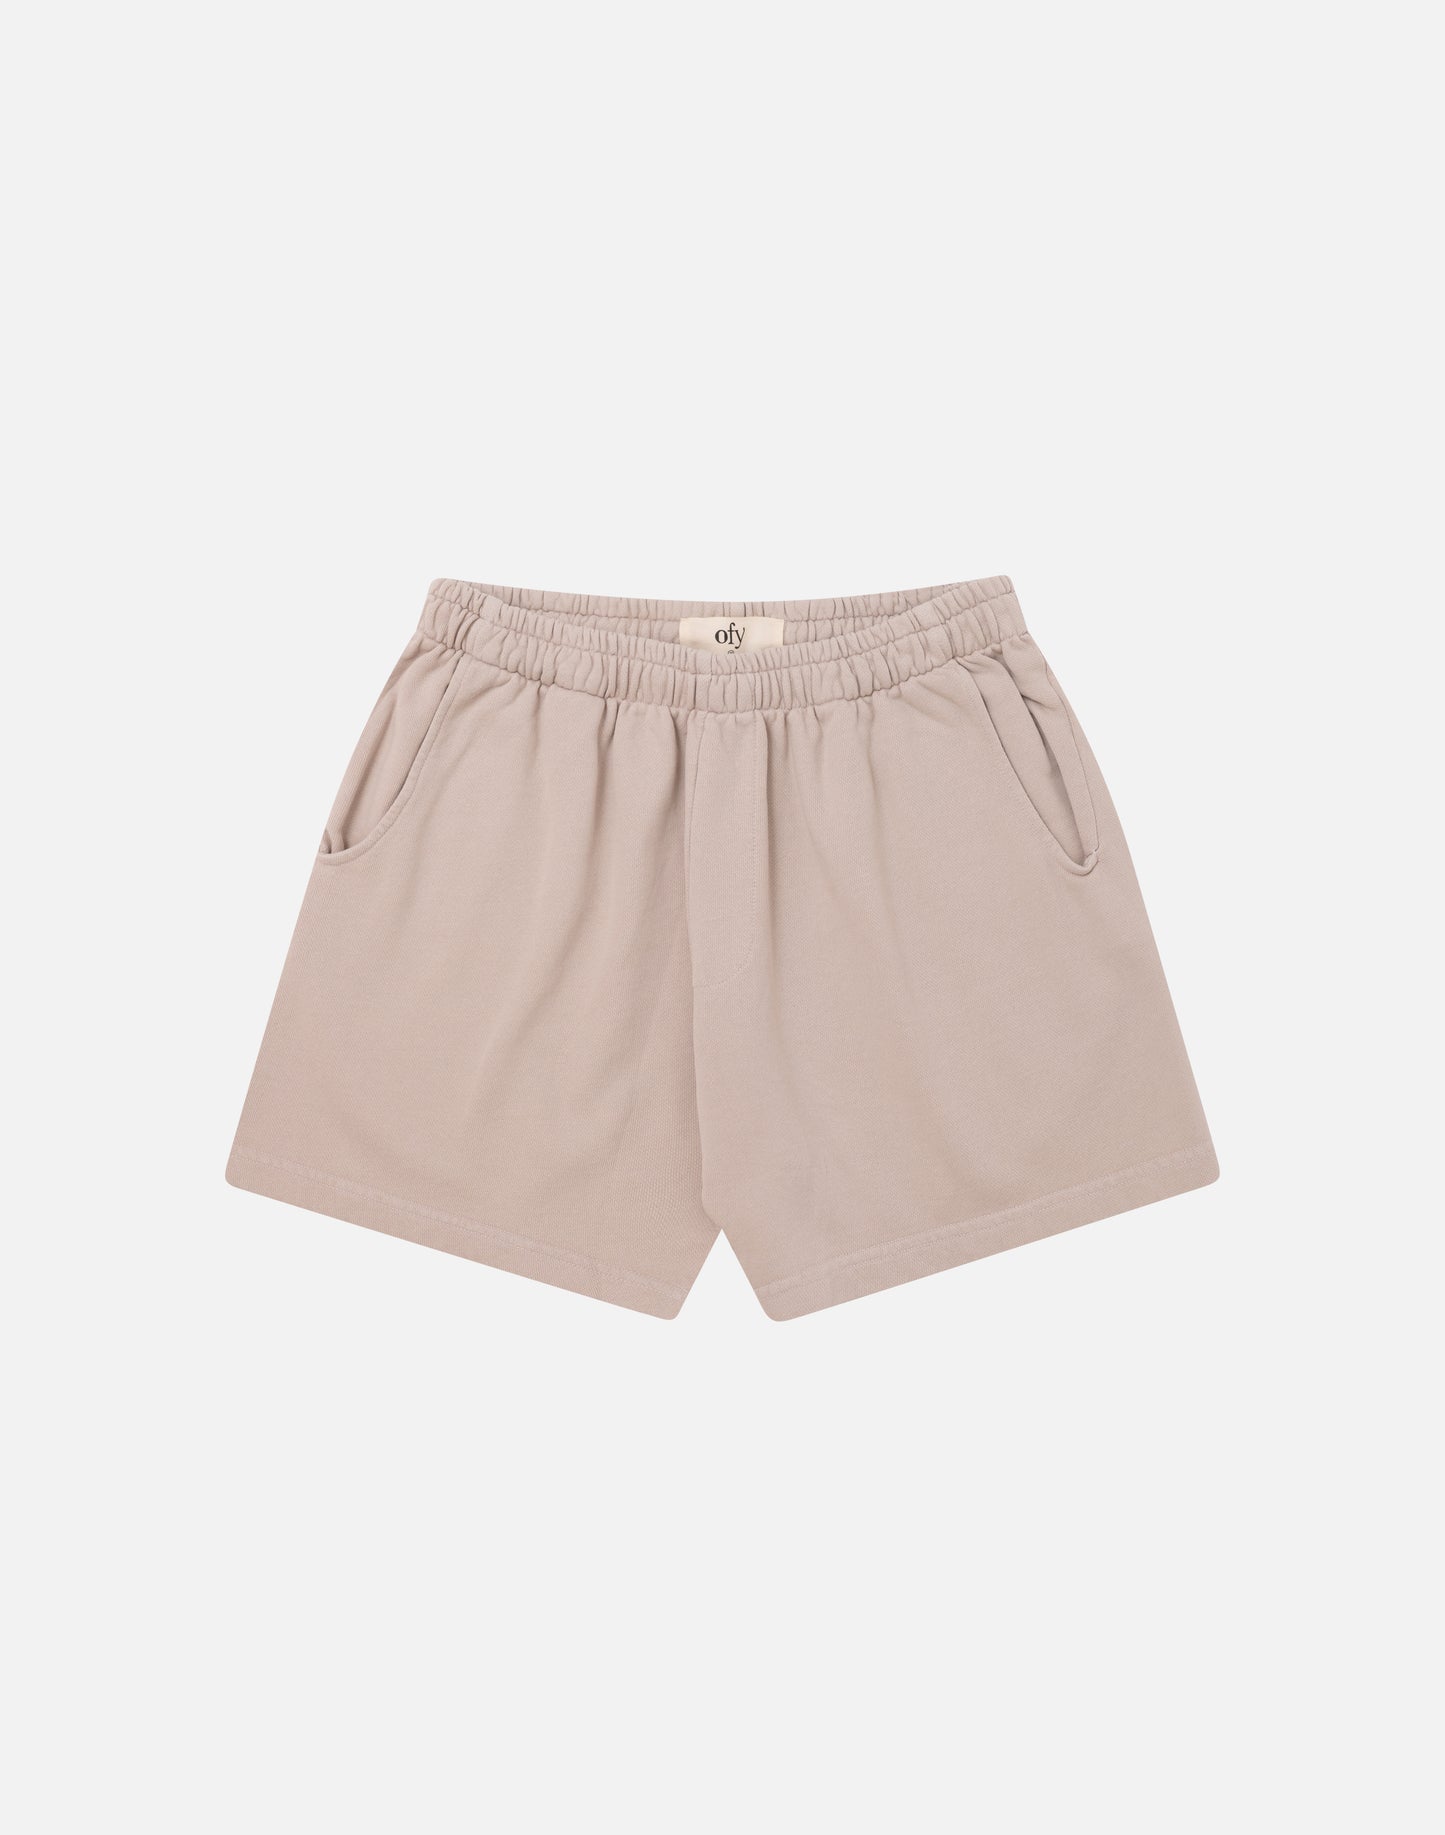 Cruise Short - Perfectly Pale